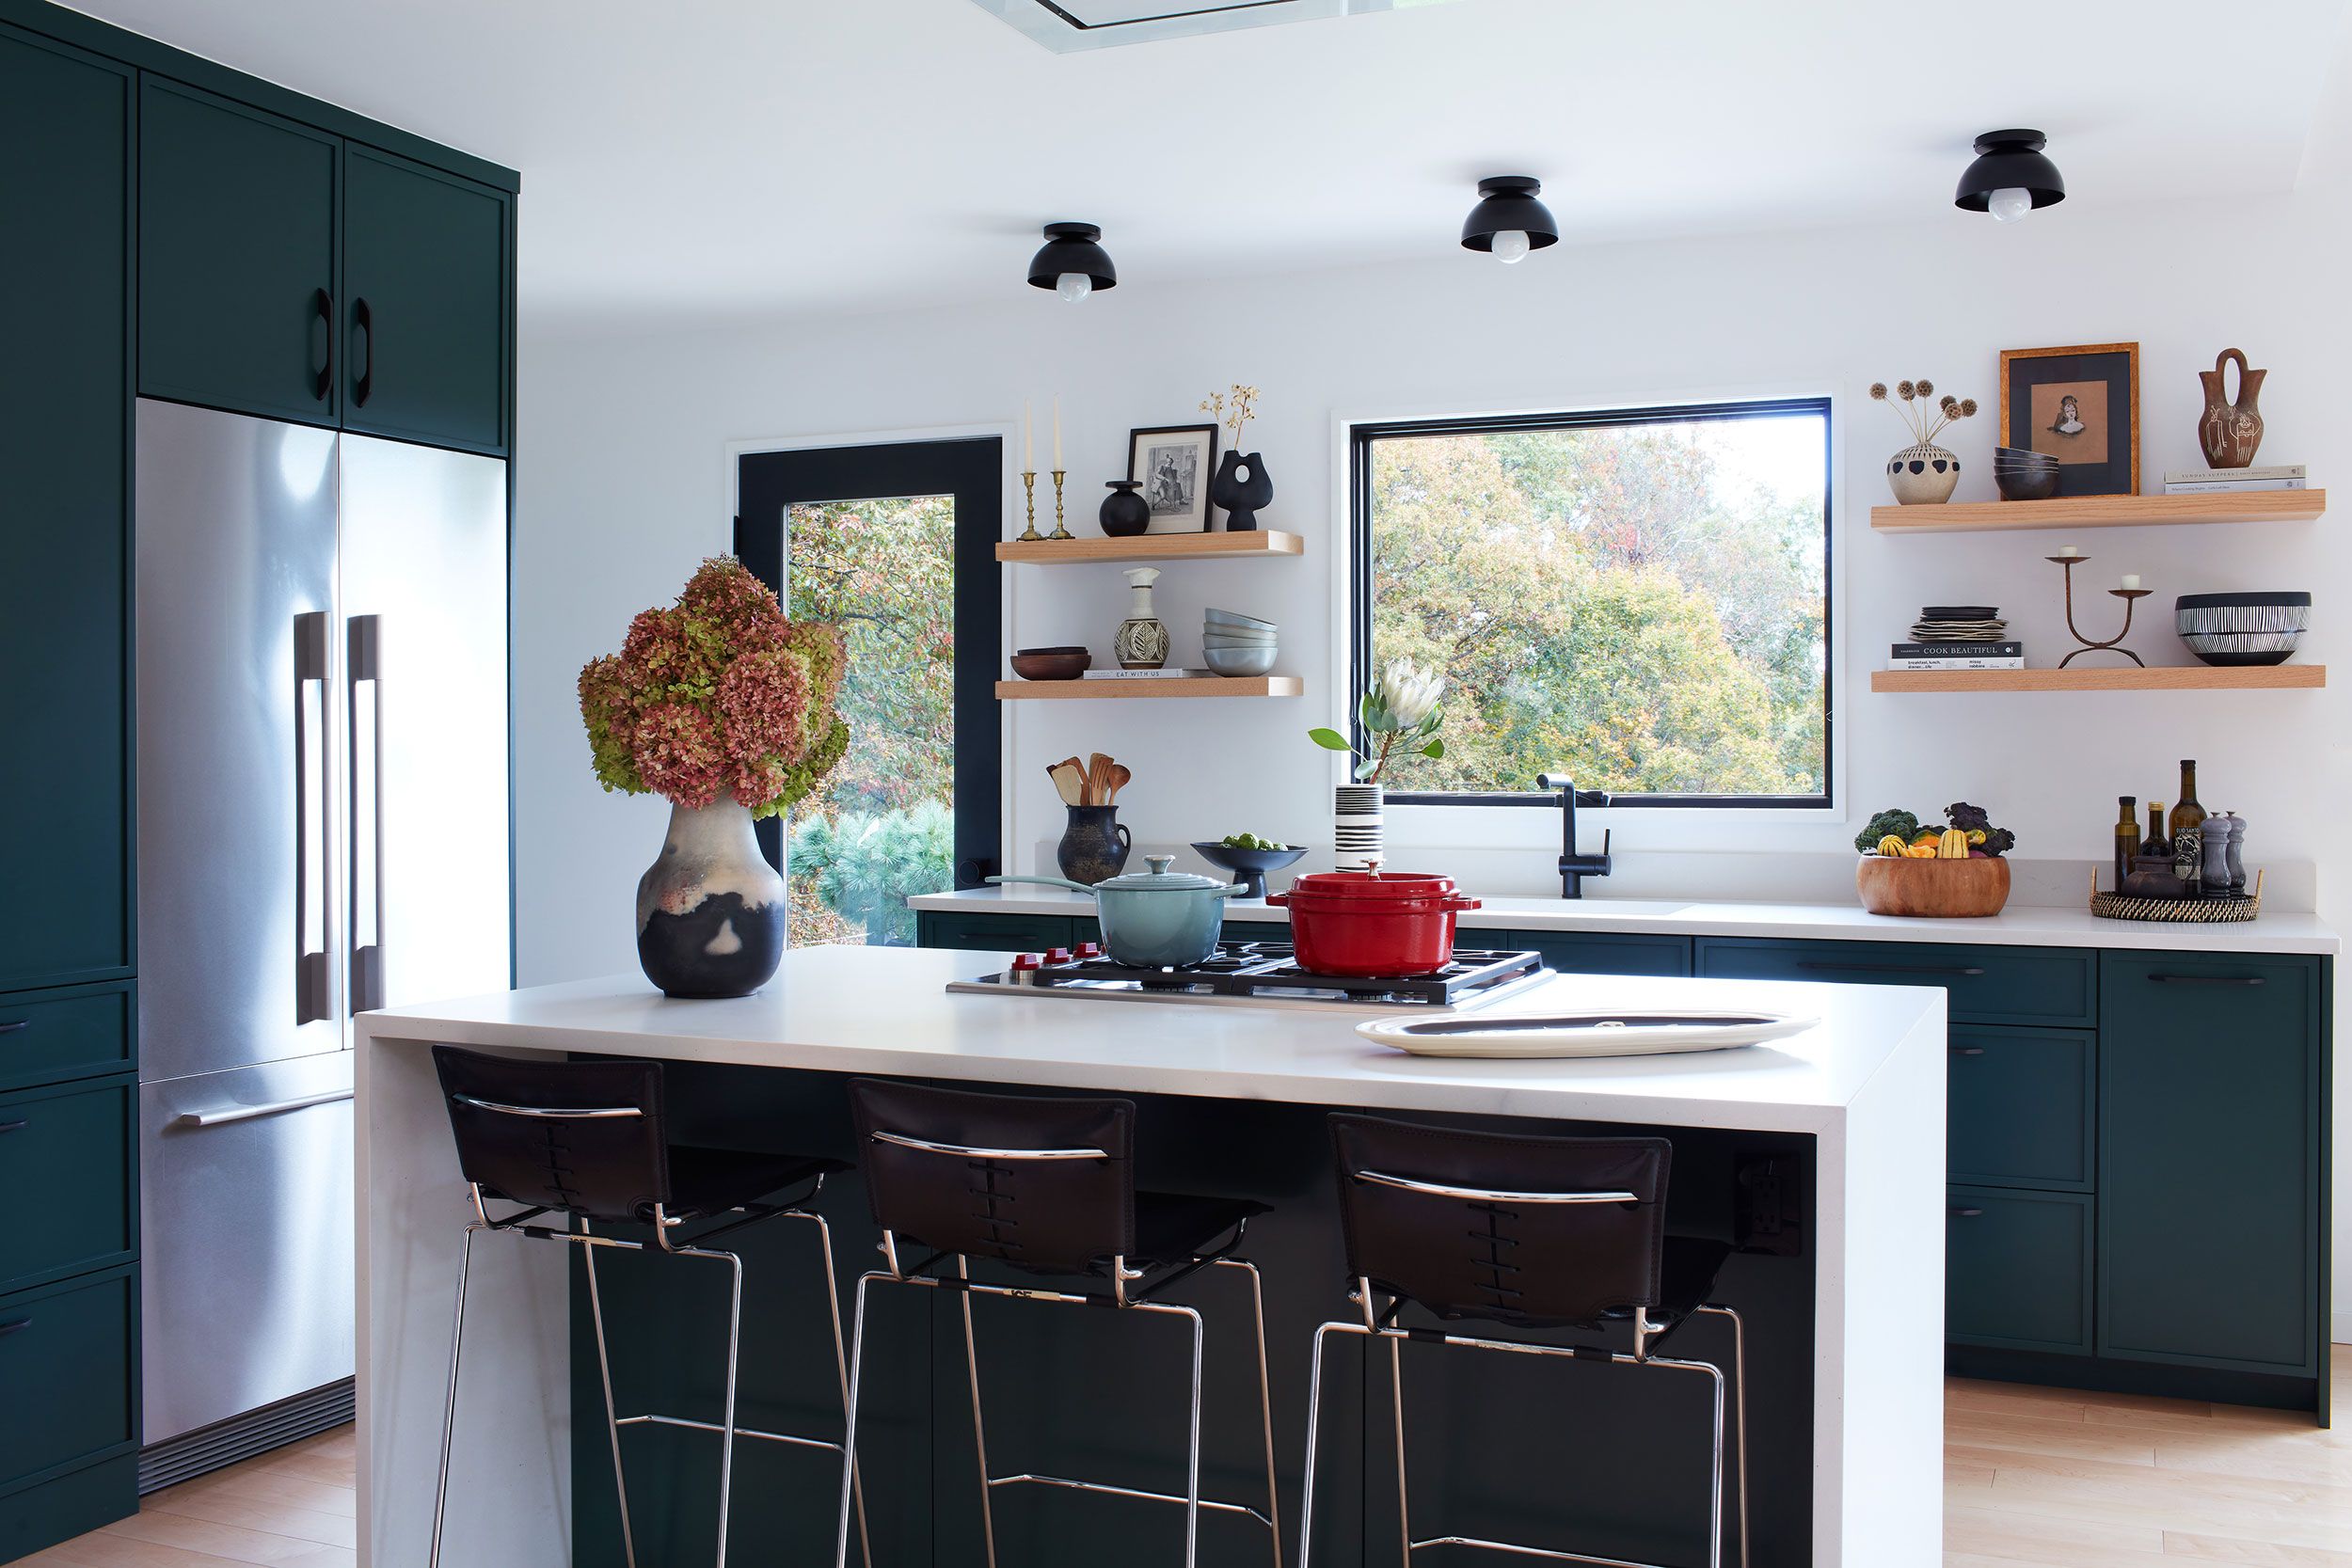 18+ Inspiring Modern Kitchens We Can't Stop Swooning Over